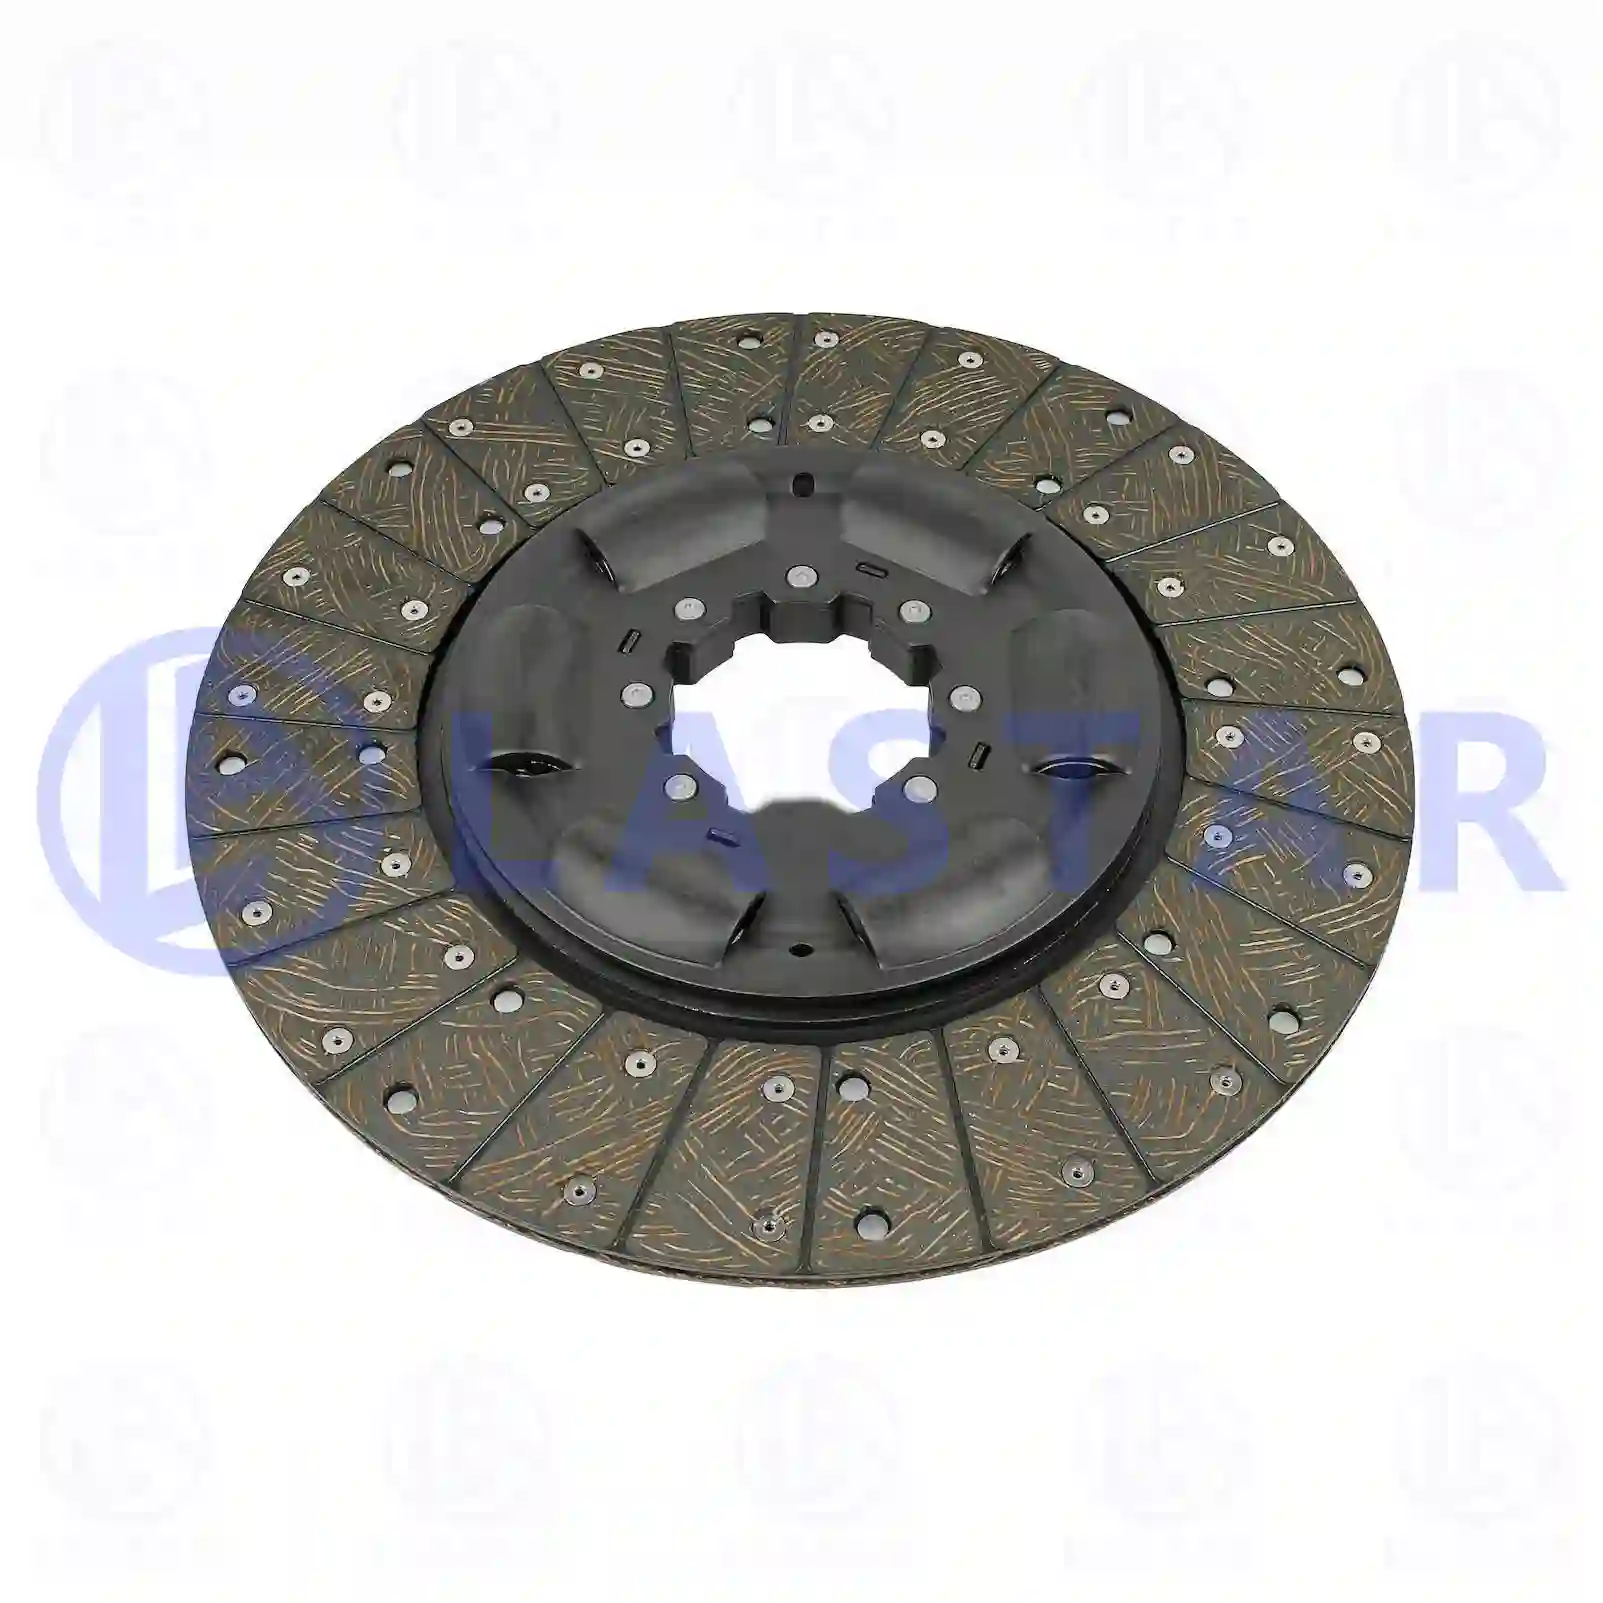 Clutch disc, 77722419, 0152508303, 0152508403, 0152508503, 0162509803, 0162509903, 0172500003, 0172500403, 0172501303, 0182505903, 0182508503, 0192503503, 0192505303, 019250530380, 0192505903, 0202509303, 020250930380, 10696404, ZG30298-0008 ||  77722419 Lastar Spare Part | Truck Spare Parts, Auotomotive Spare Parts Clutch disc, 77722419, 0152508303, 0152508403, 0152508503, 0162509803, 0162509903, 0172500003, 0172500403, 0172501303, 0182505903, 0182508503, 0192503503, 0192505303, 019250530380, 0192505903, 0202509303, 020250930380, 10696404, ZG30298-0008 ||  77722419 Lastar Spare Part | Truck Spare Parts, Auotomotive Spare Parts